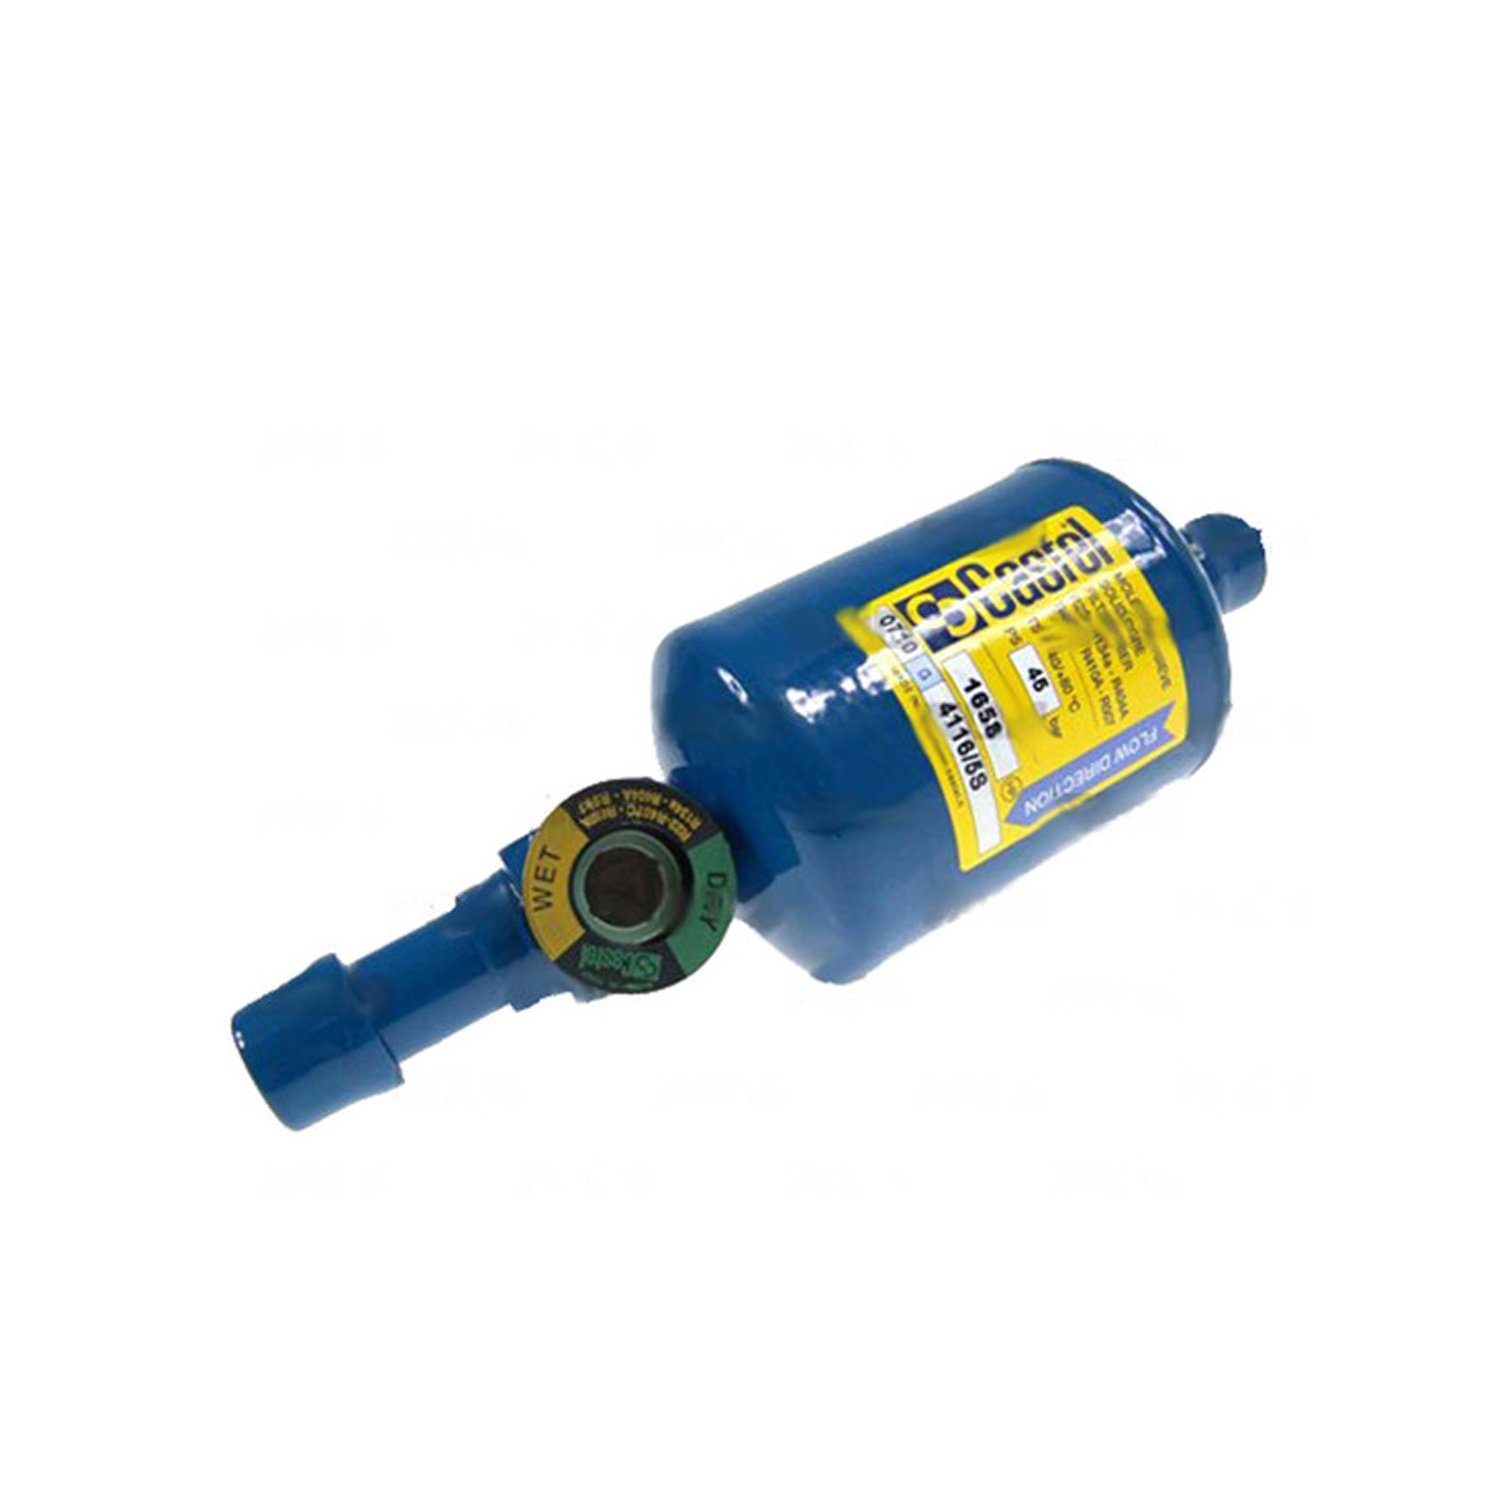 Filter drier with sight glass (combi) CASTEL, CO2, 4116E / 5S, 165S, 5/8 "ODS solder connection